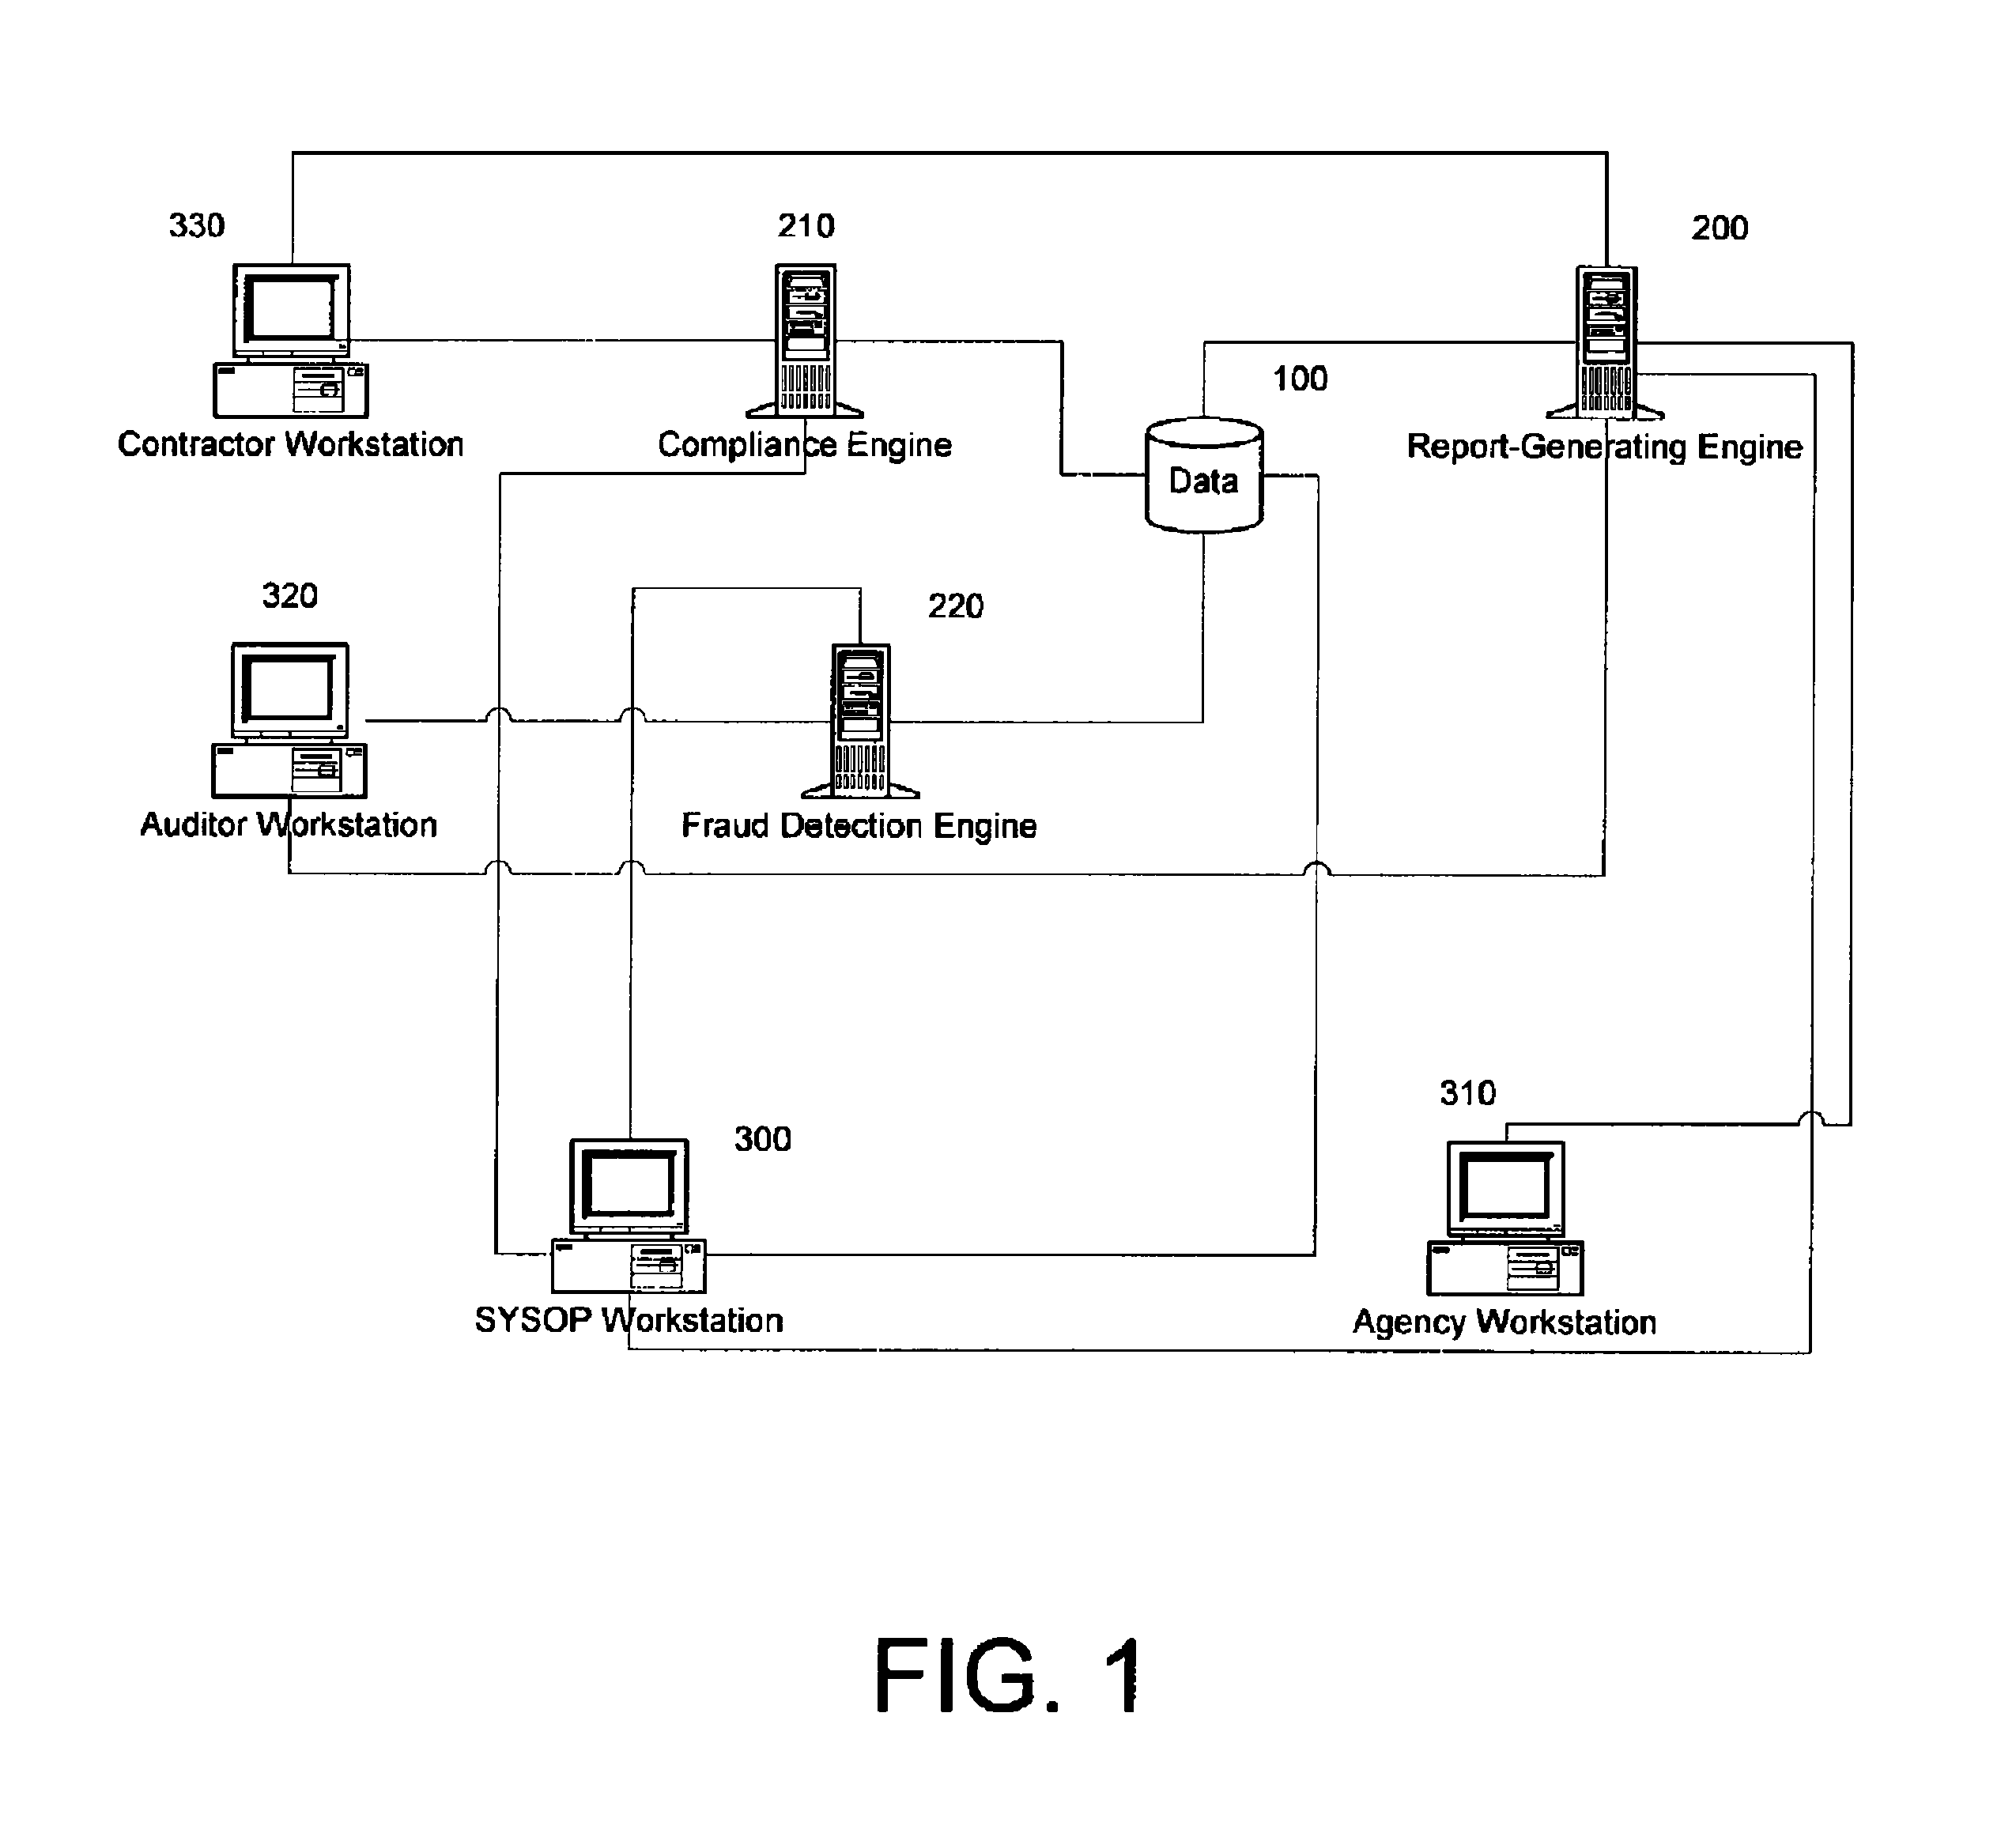 System and method for coordinating the collection, analysis and storage of payroll information provided to government agencies by government contractors